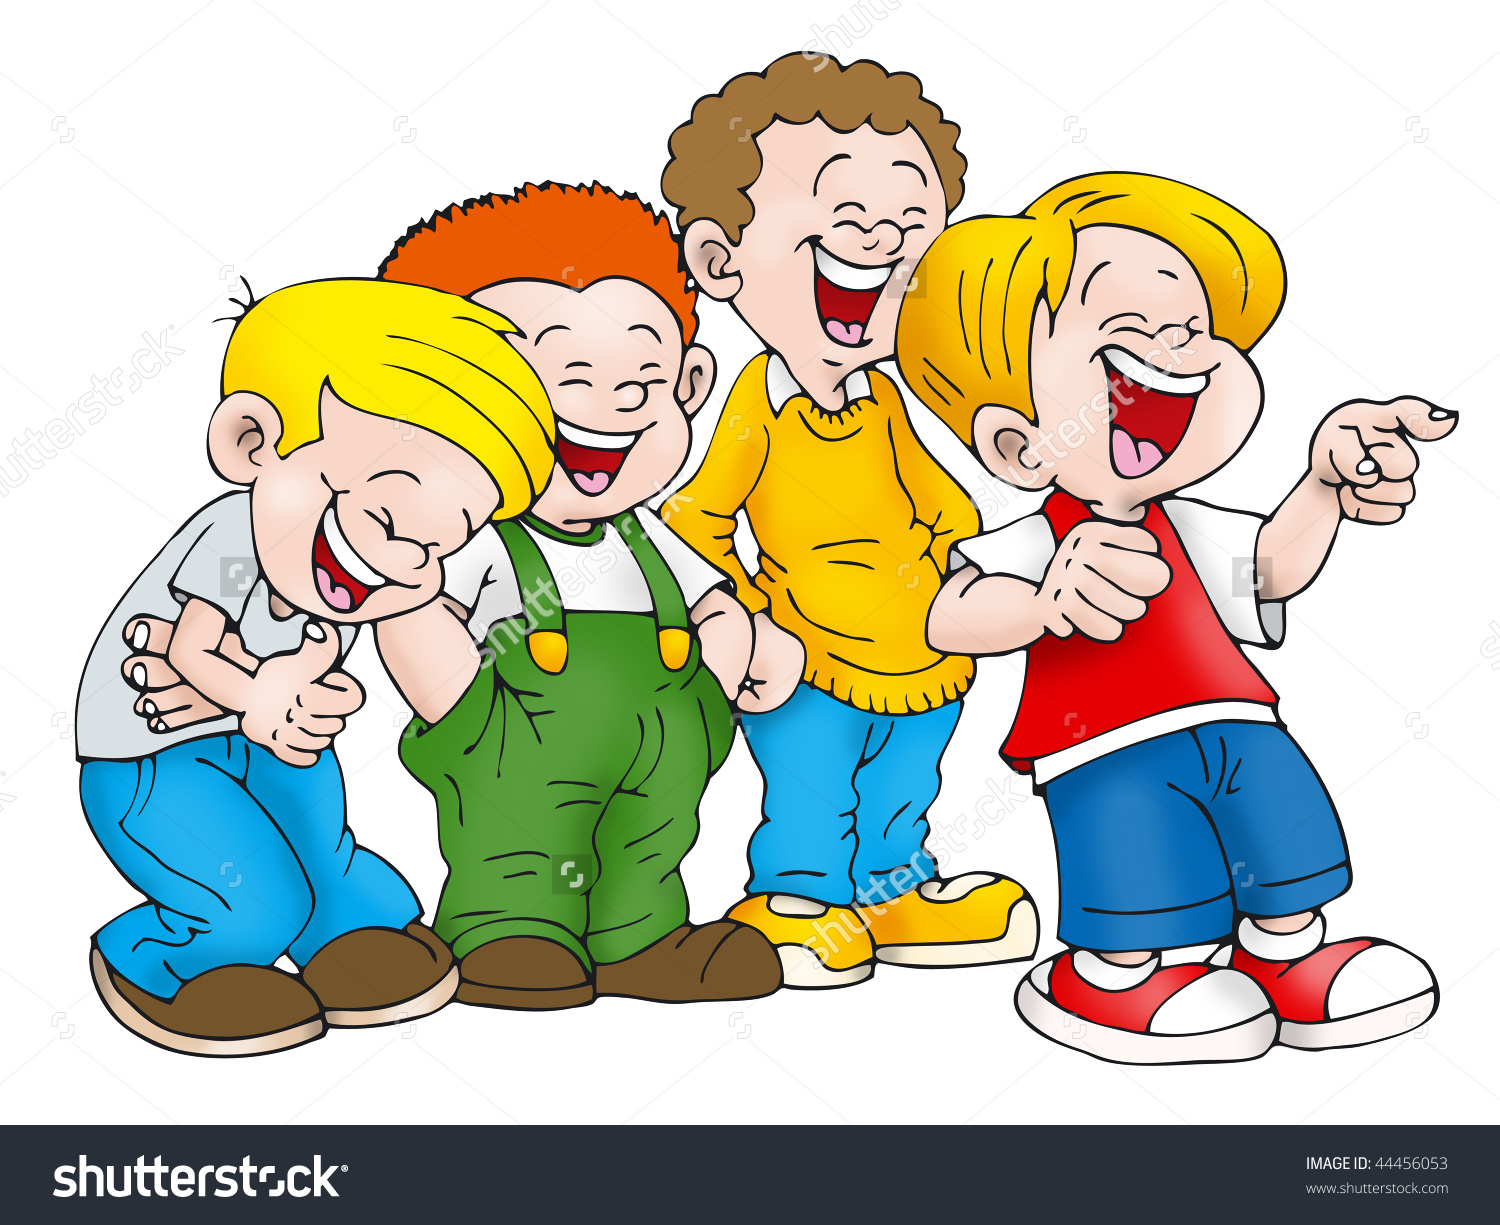 laughter clipart - Laughter Clipart